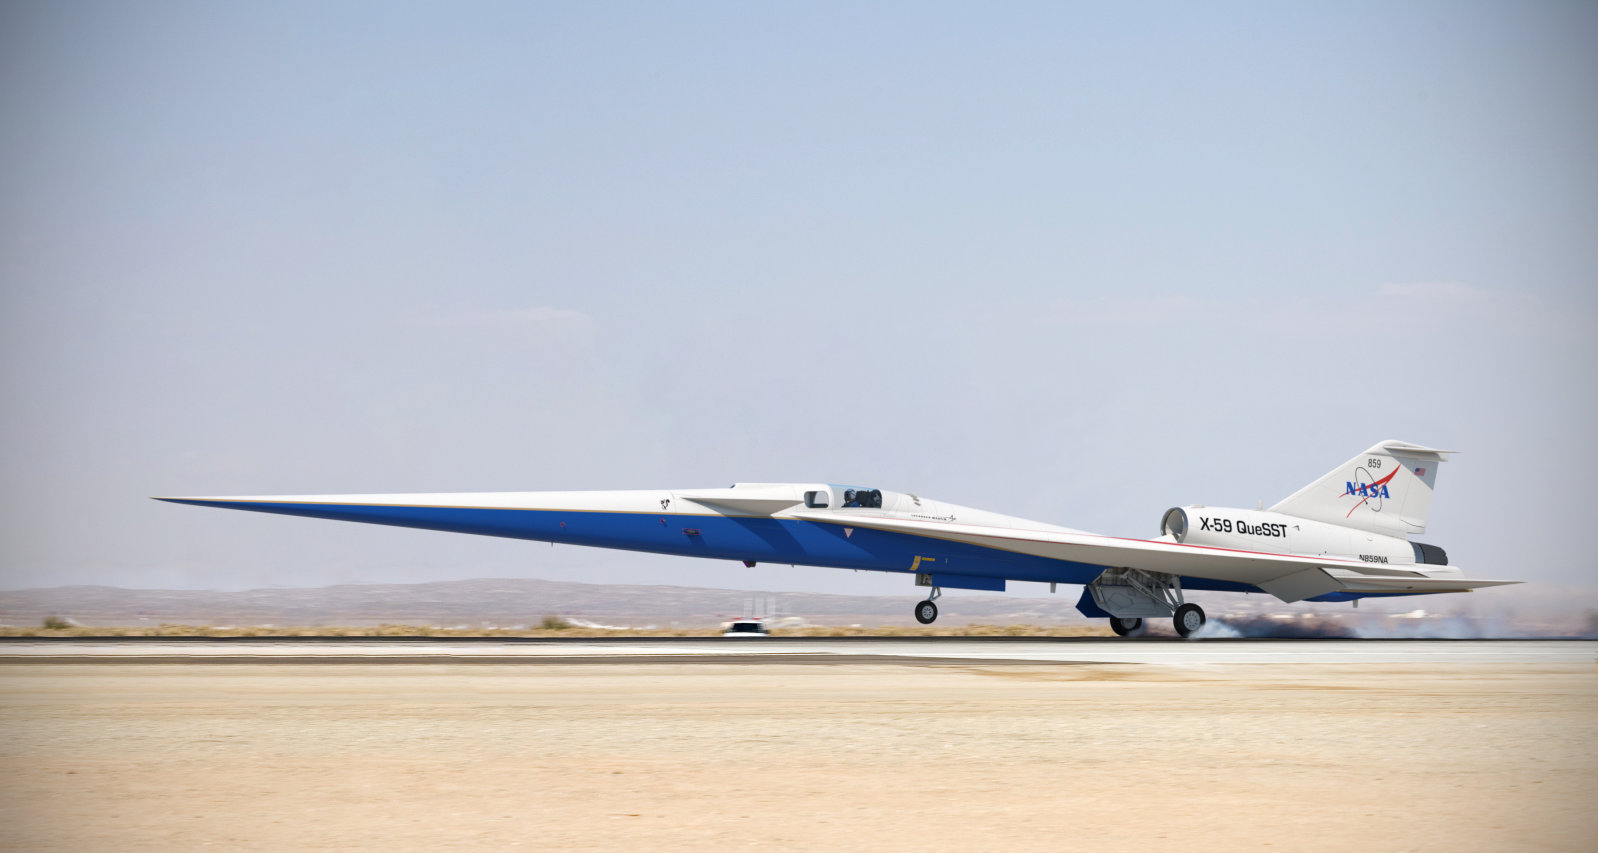 NASA's quiet supersonic aircraft will make its first flight in 2020